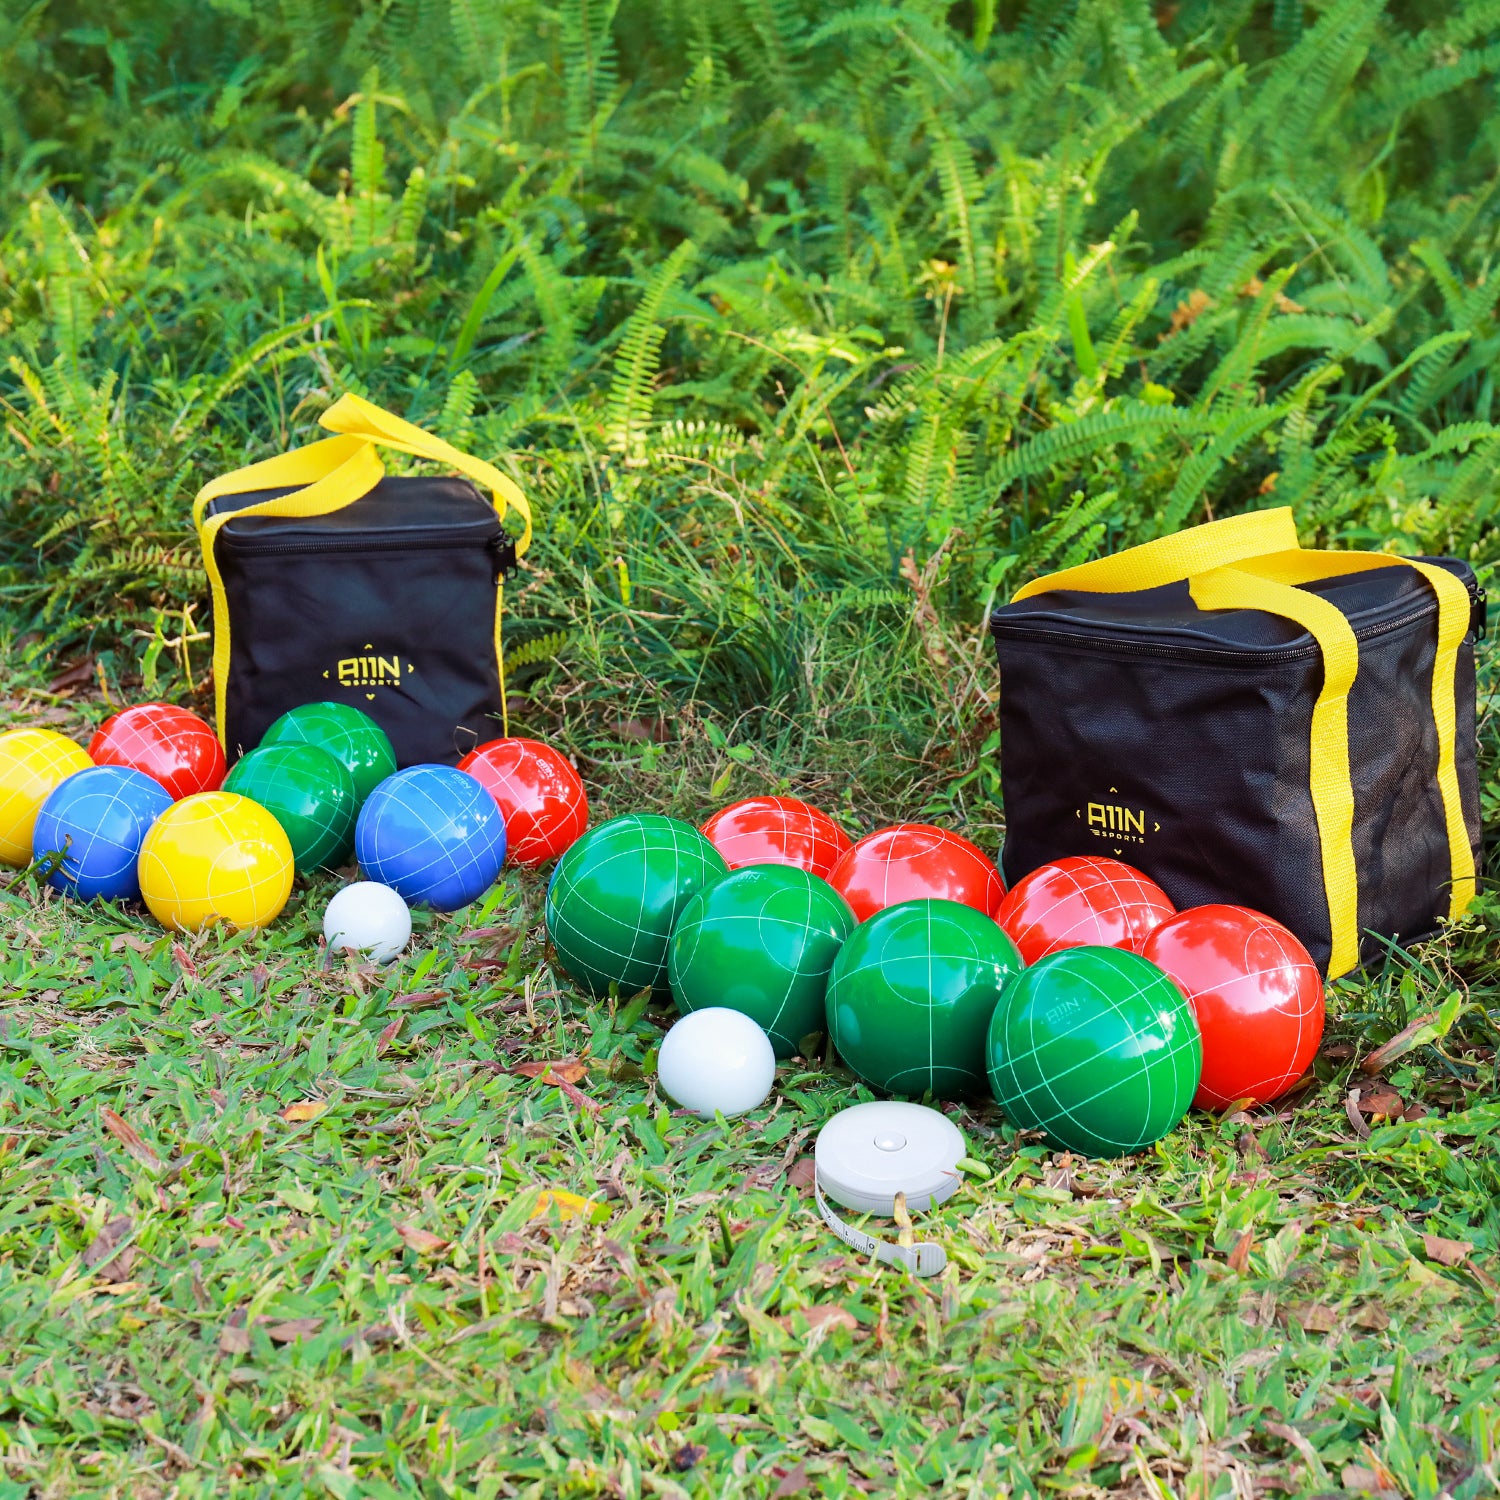 A11N SPORTS Sporting Goods > Outdoor Recreation > Outdoor Games > Lawn Games 107mm Official Size Bocce Ball Set